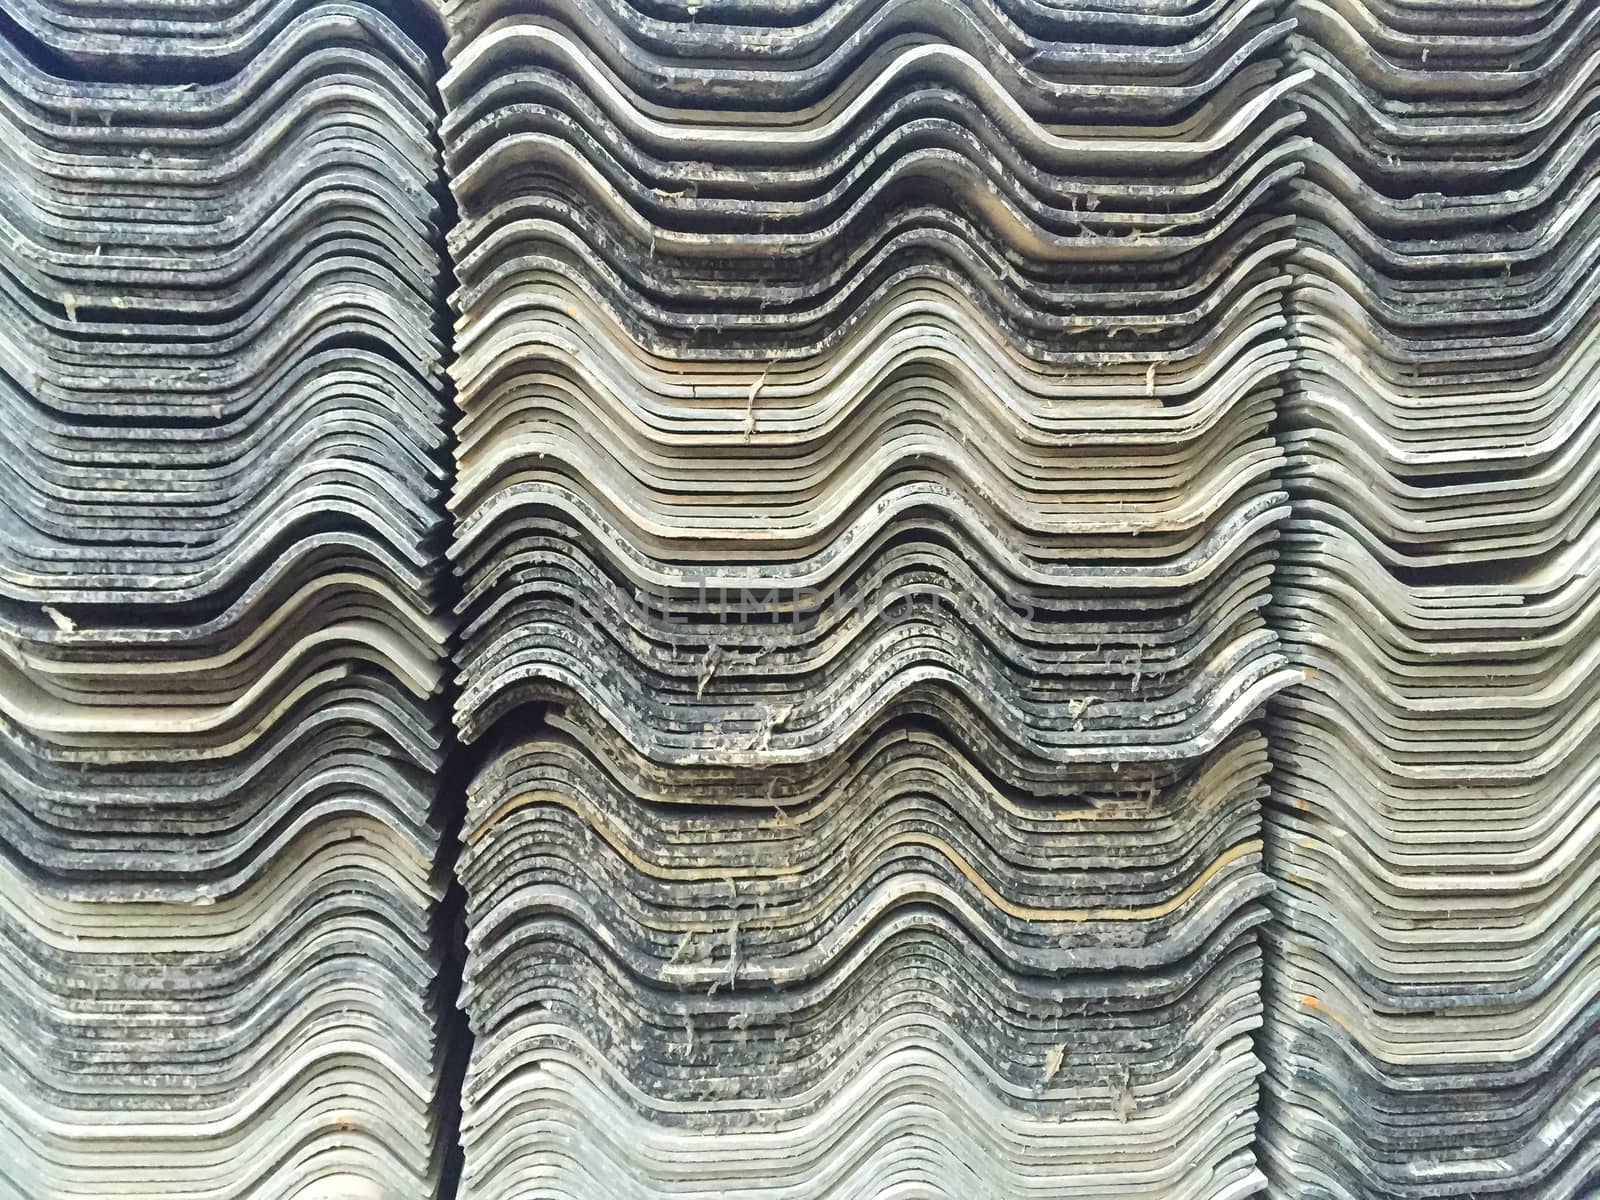 Stacks of old roof tiles, texture background.